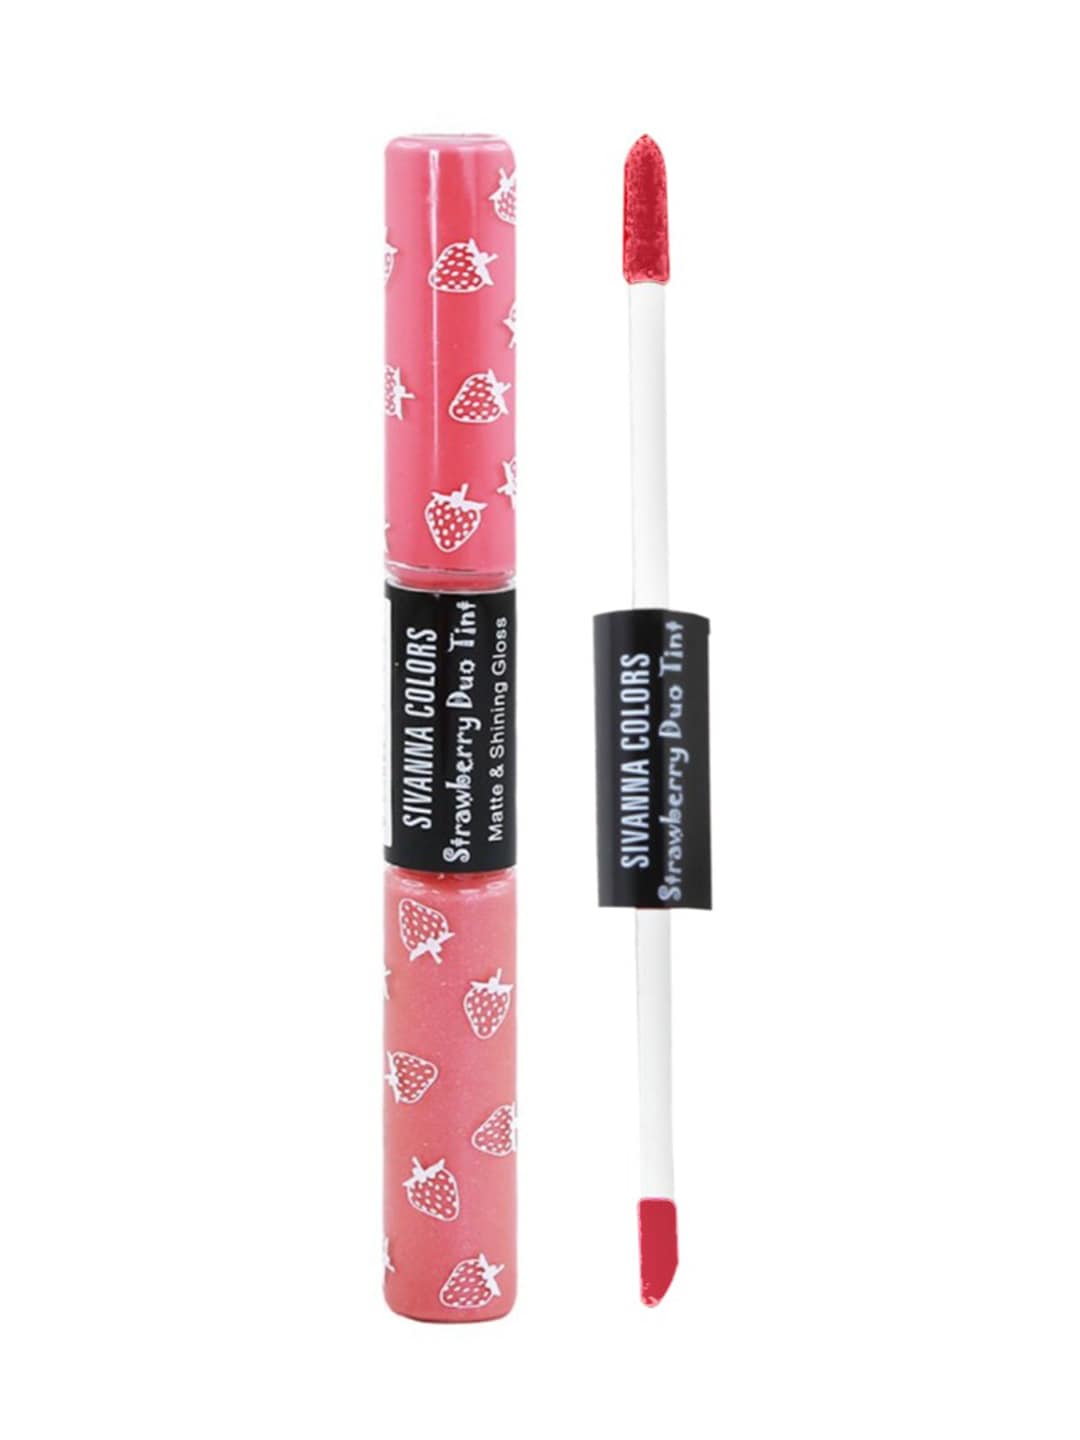 Sivanna Colors 2 in 1 Strawberry Duo Tint Matte & Shining Lip Gloss - DK035 07 Price in India